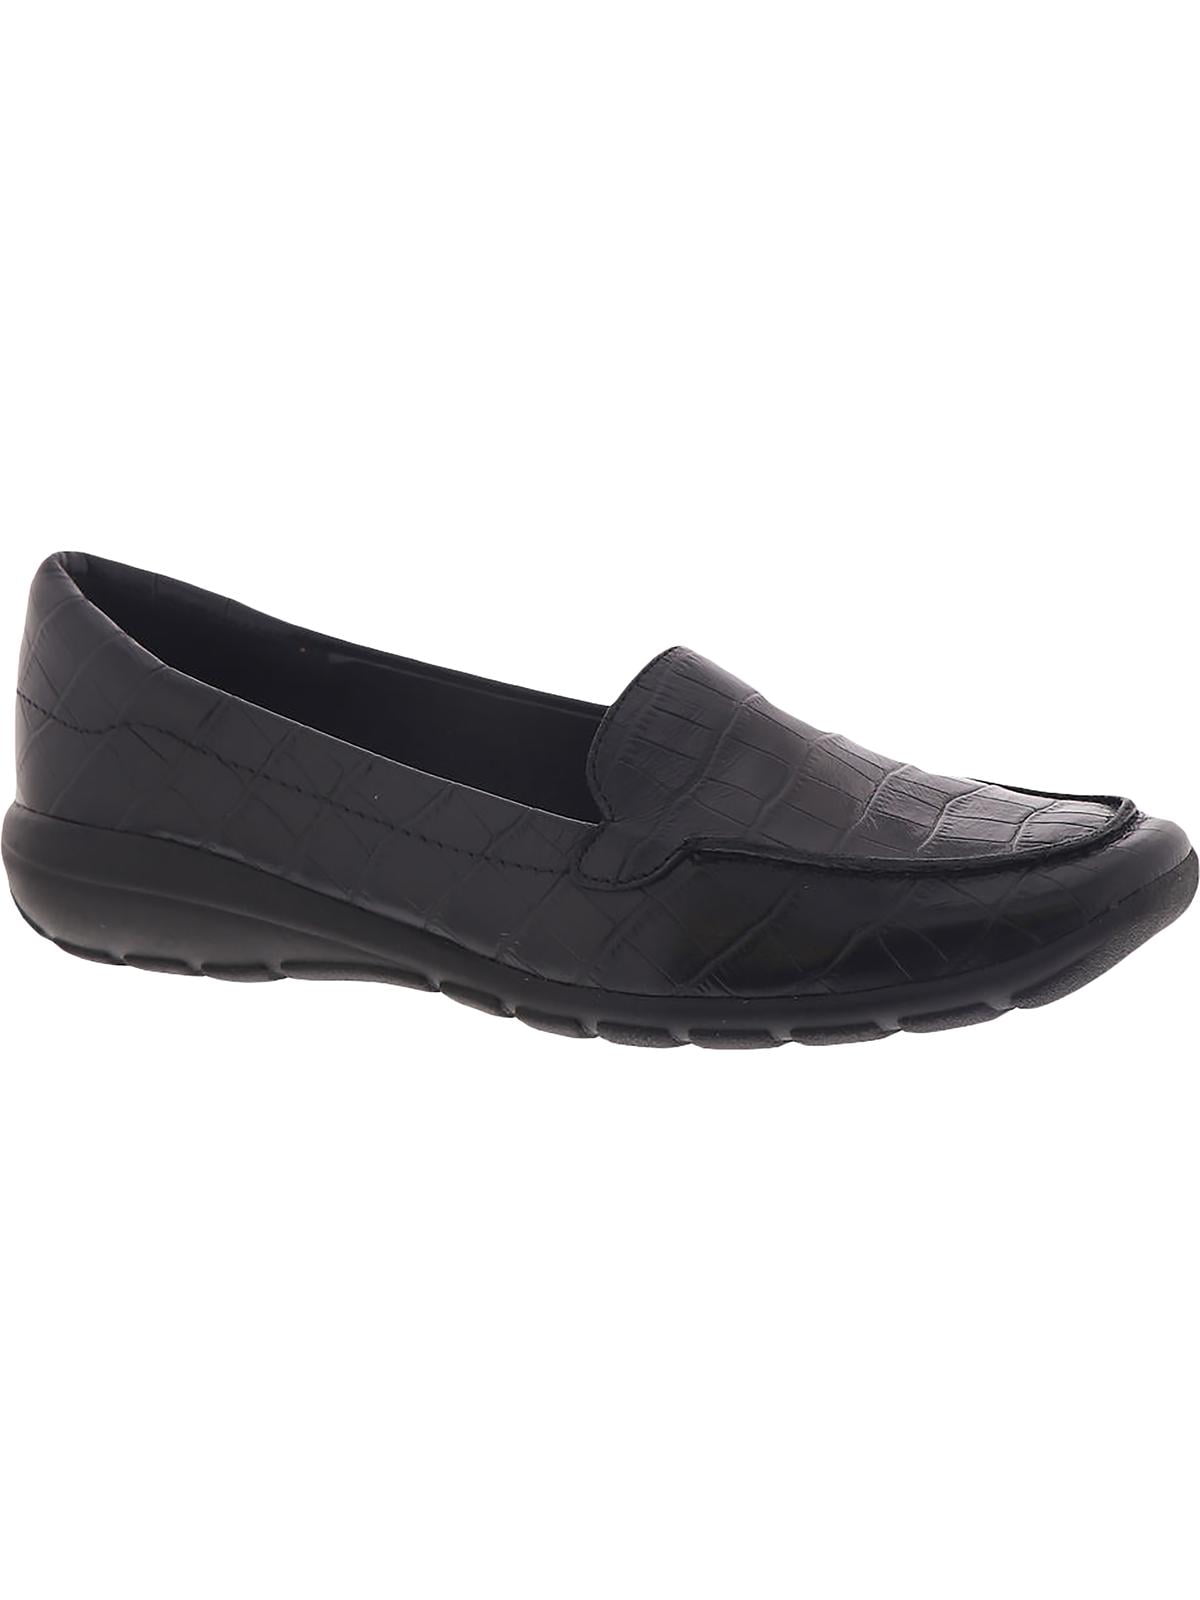 Easy Spirit Womens Abide 8 Leather Slip On Comfort Loafers Shoes BHFO 0551